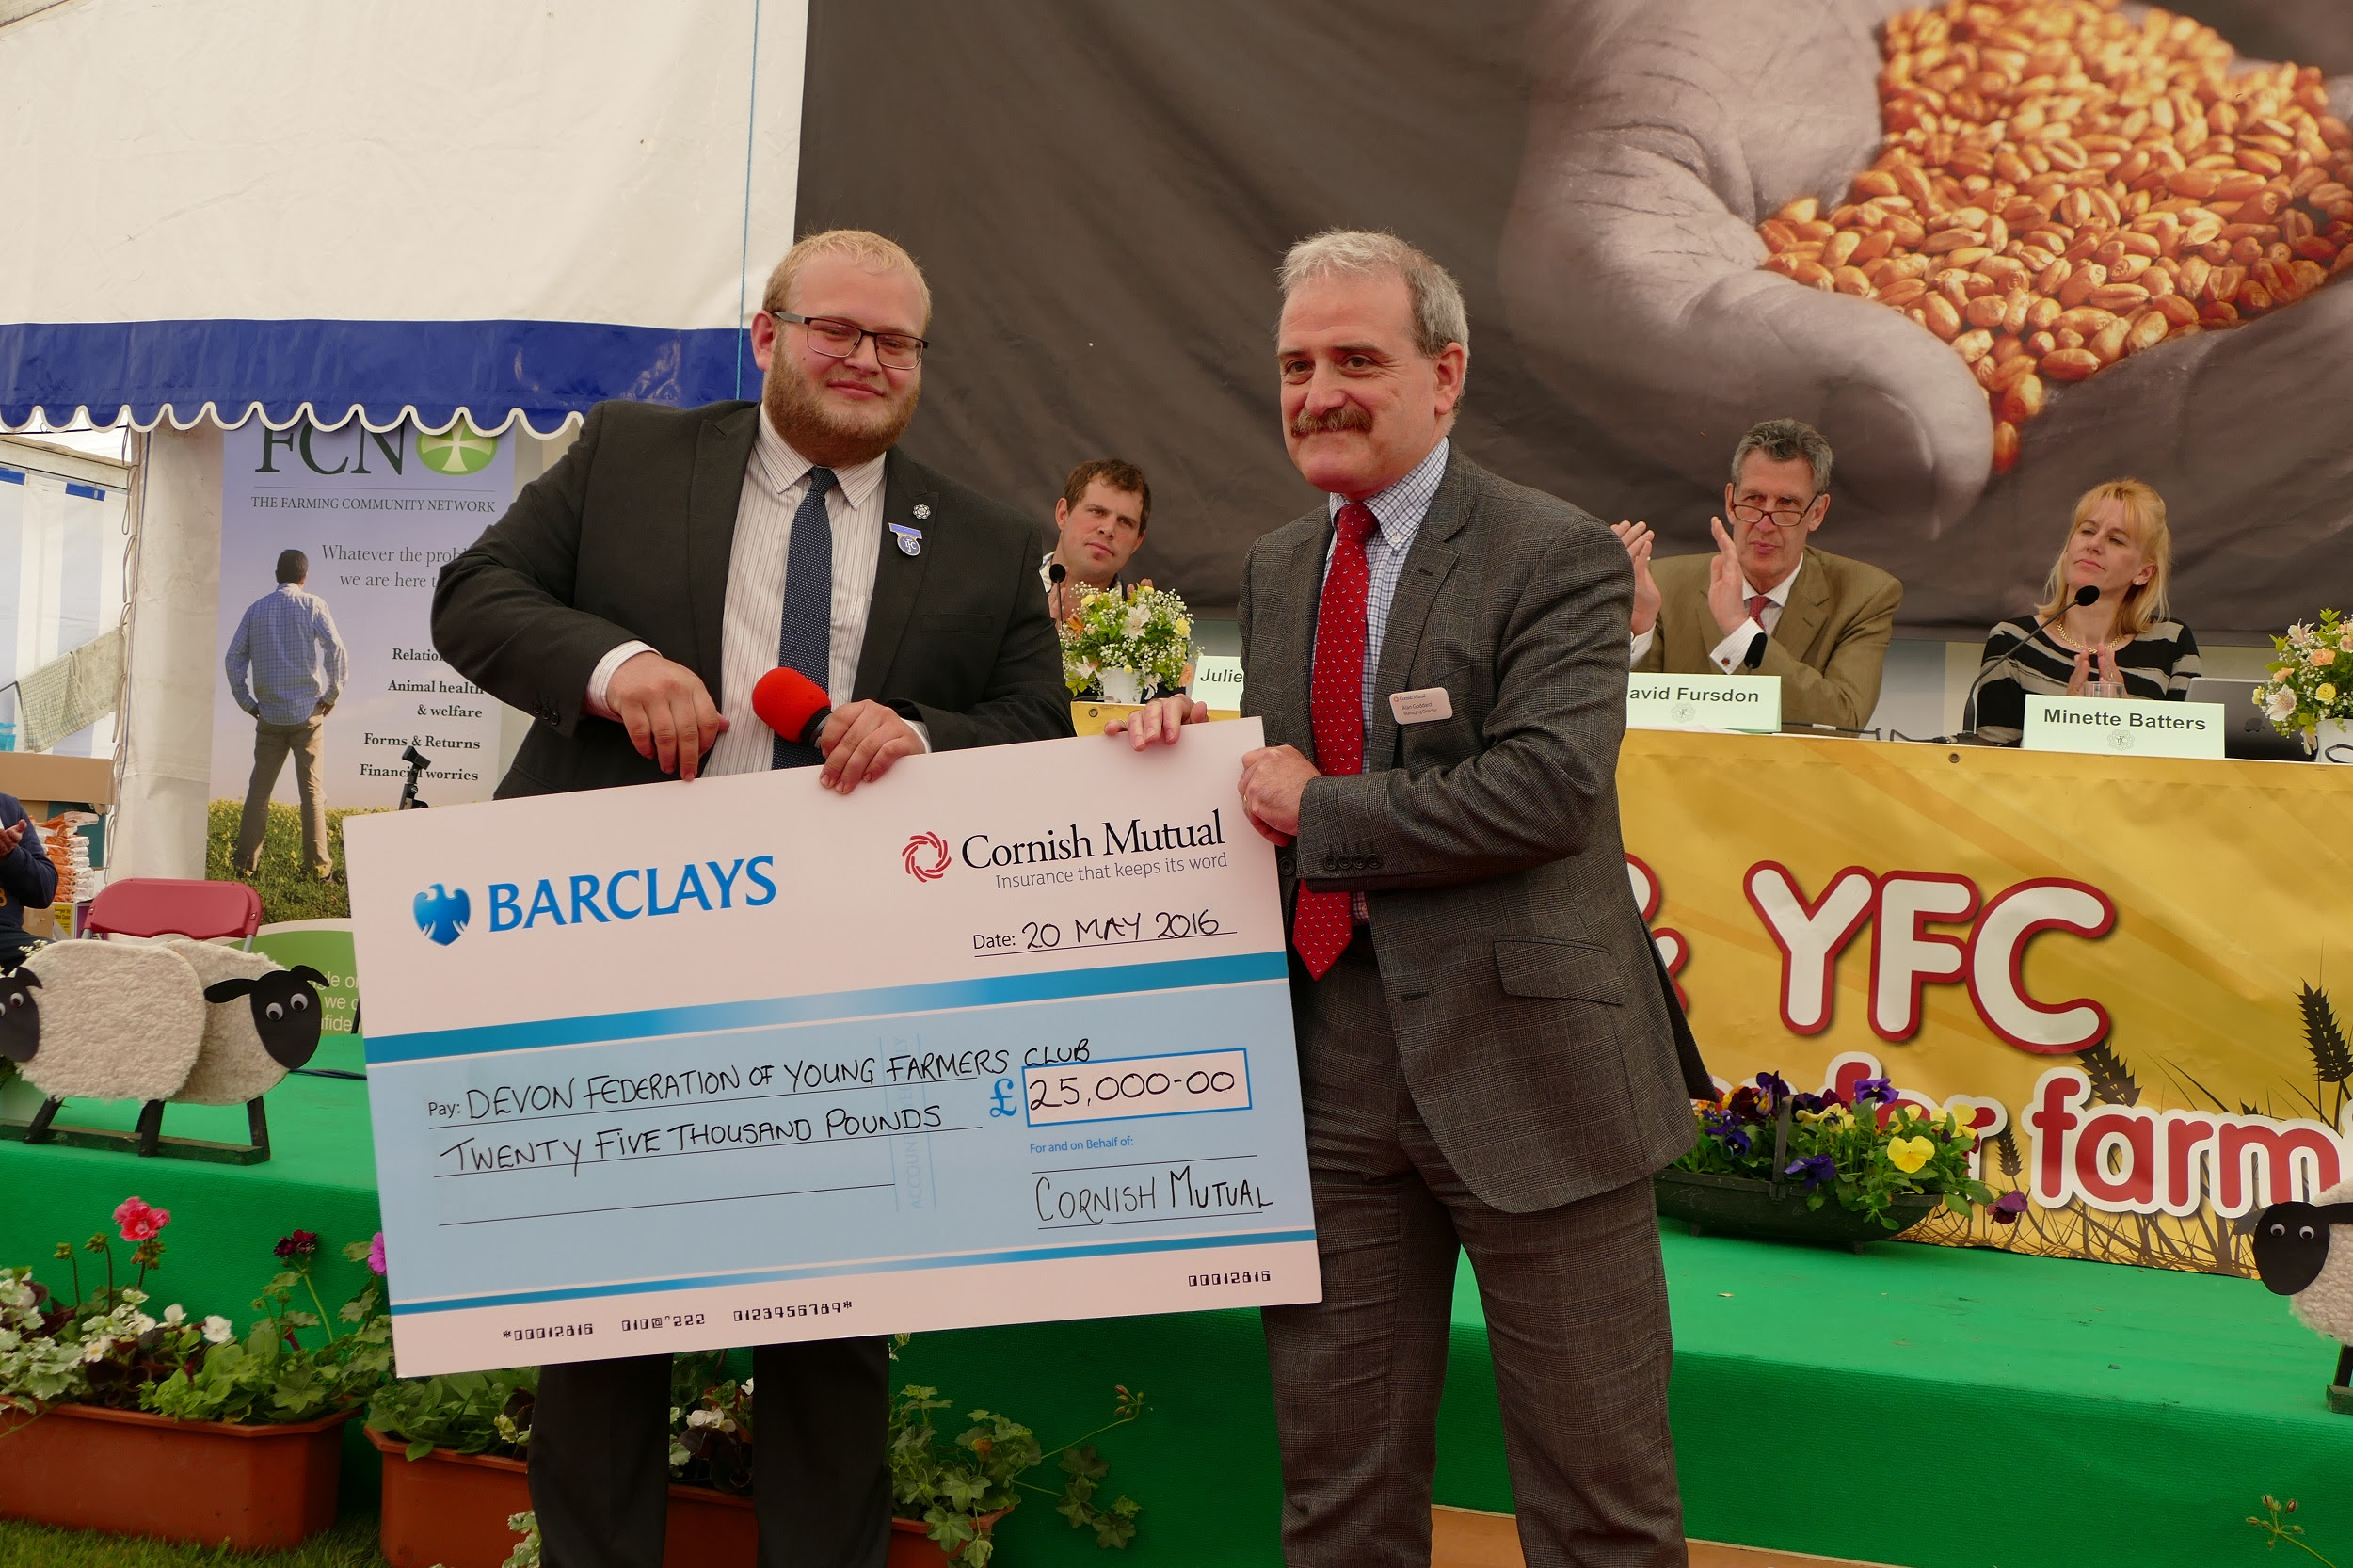 Jake Henson, Devon County Young Farmers County Chairman accepts the cheque on behalf of Devon Young Farmers from Alan Goddard, Managing Director of Cornish Mutual